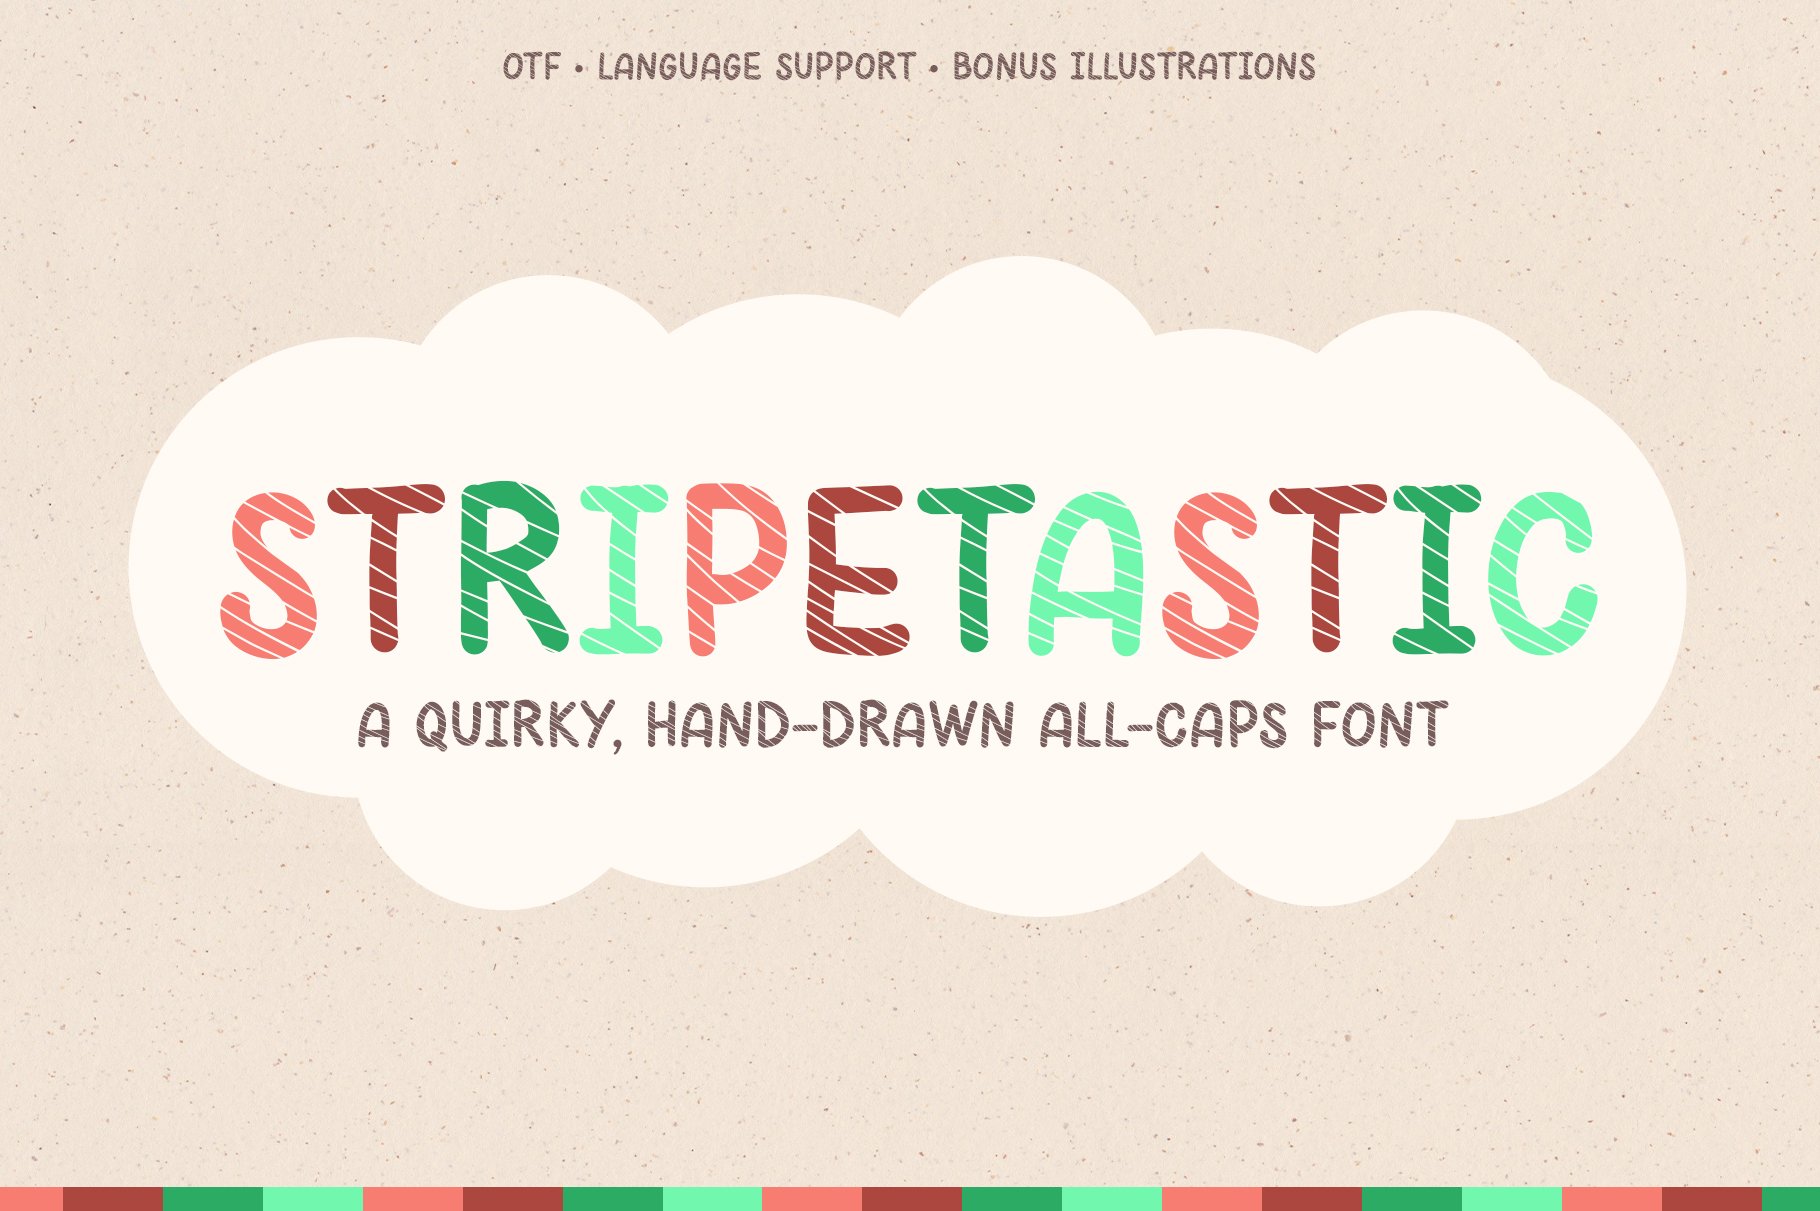 Stripetastic: Quirky Display Font cover image.